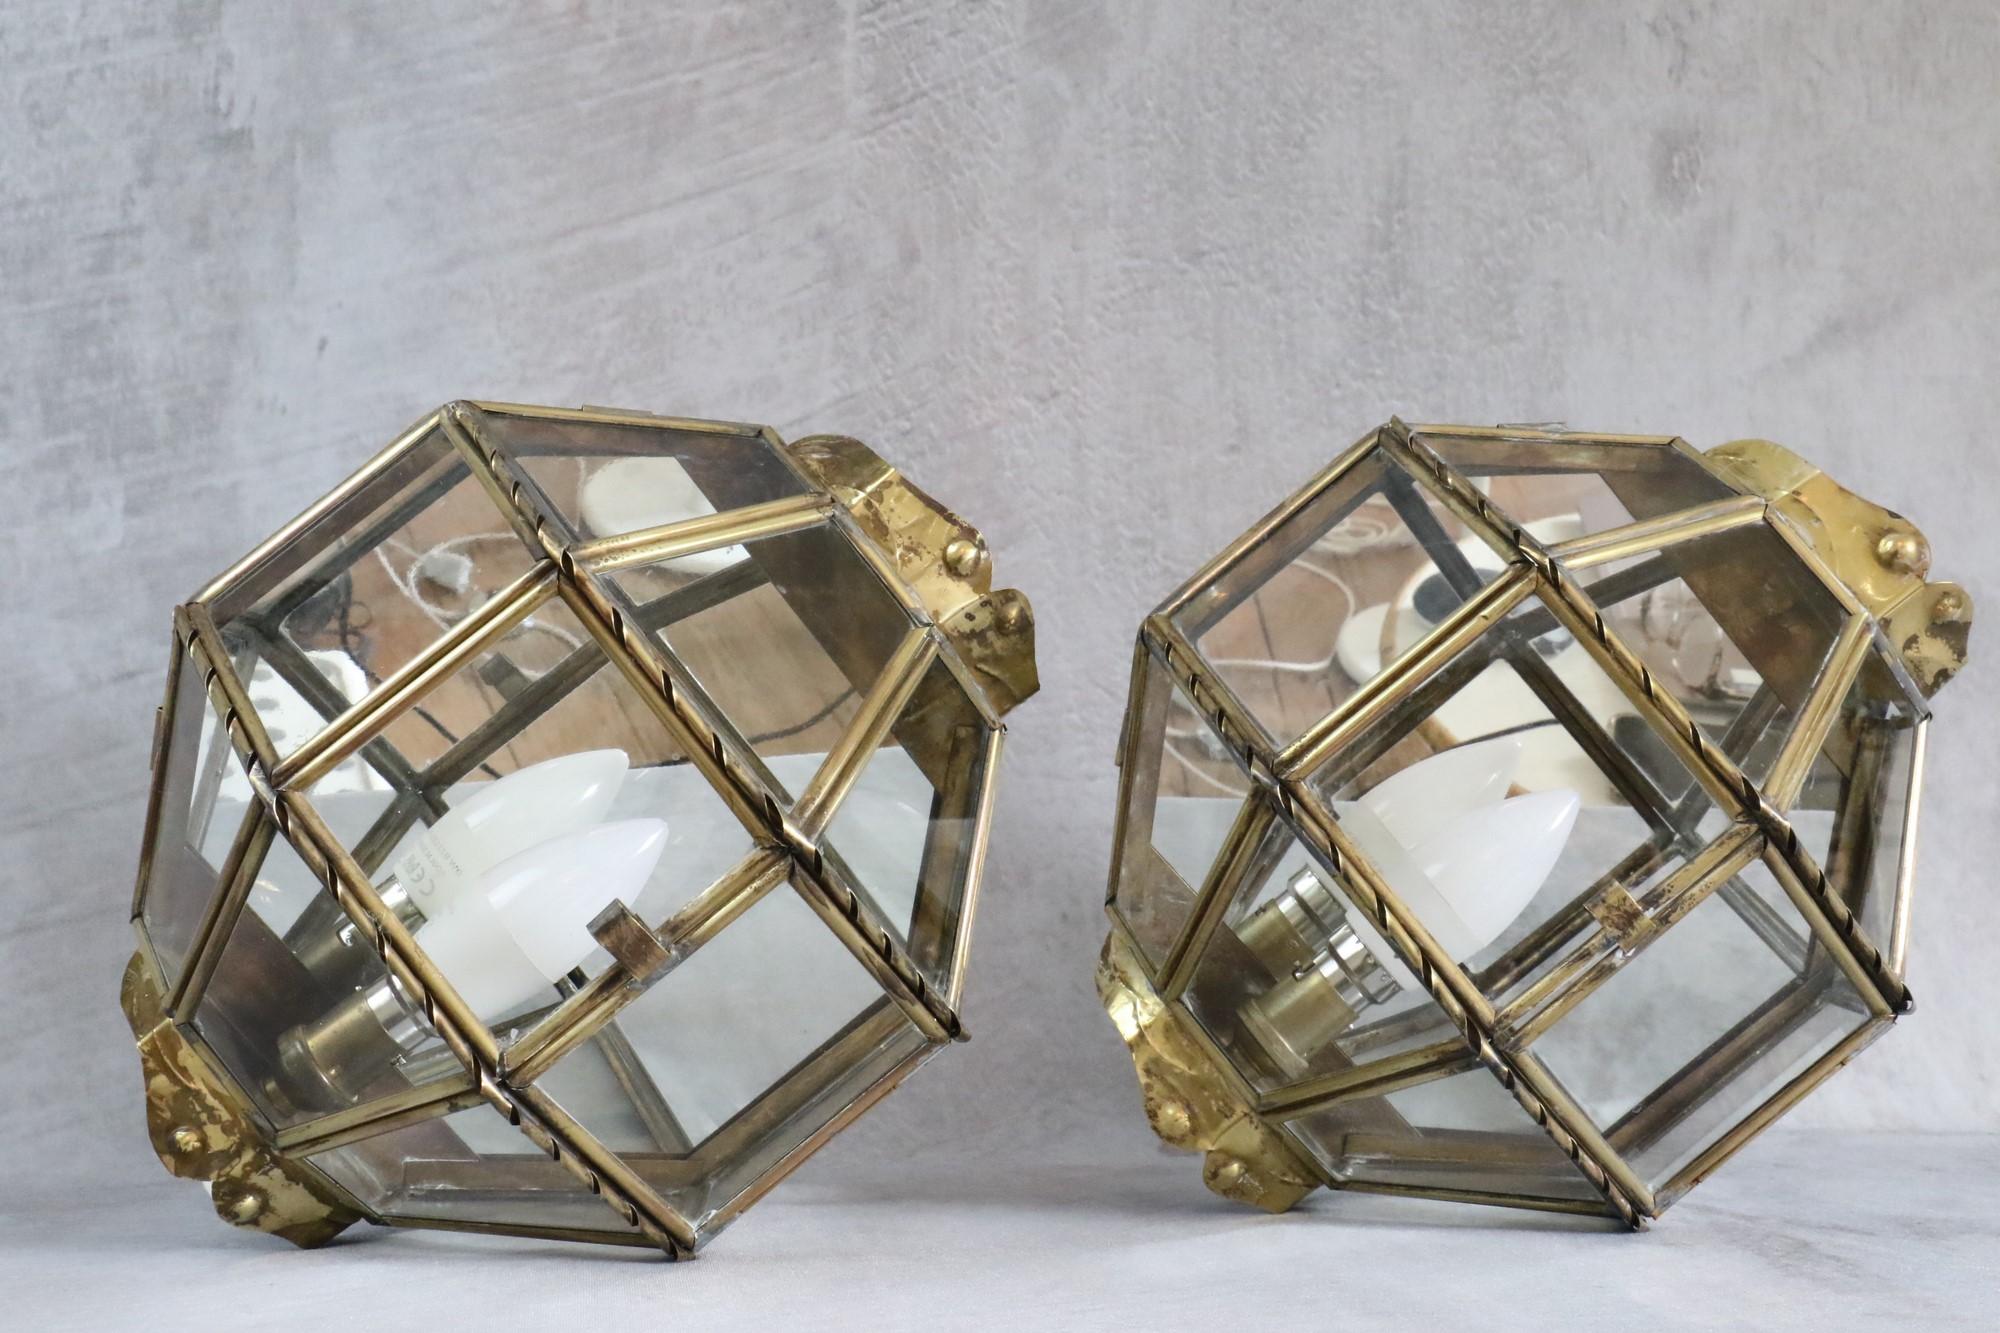 Brass and Glass Pair of Vintage Handcrafted Wall Lamps, 1940s, France 1